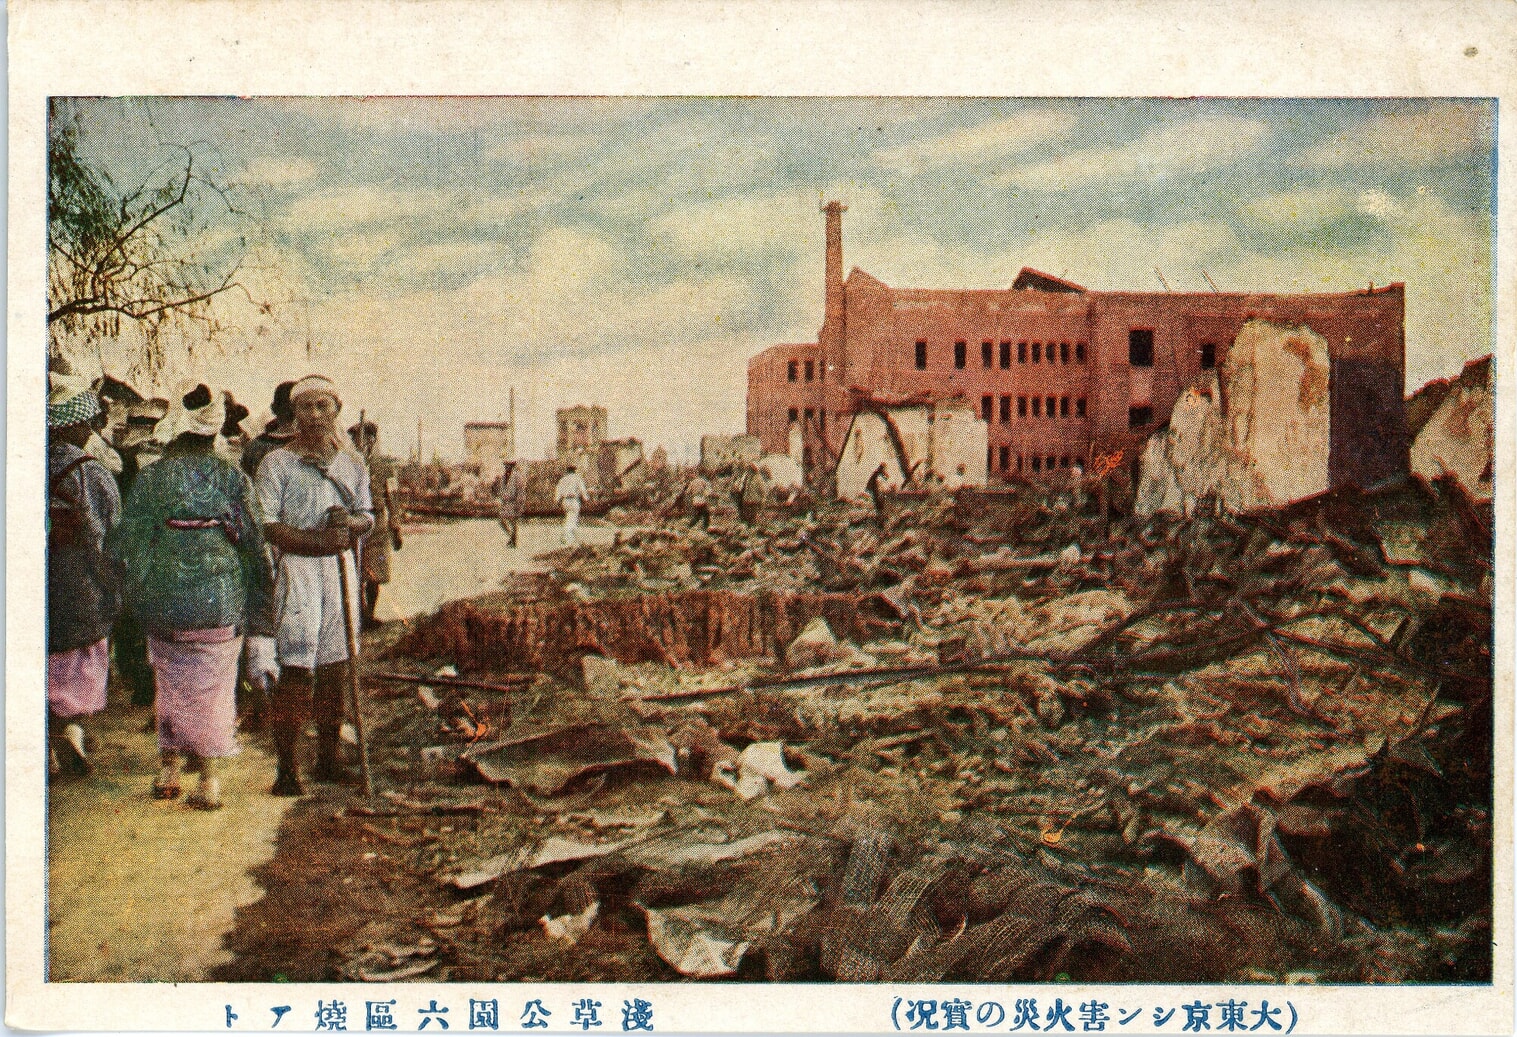 The Great Kanto Earthquake: Postcards of Tragedy